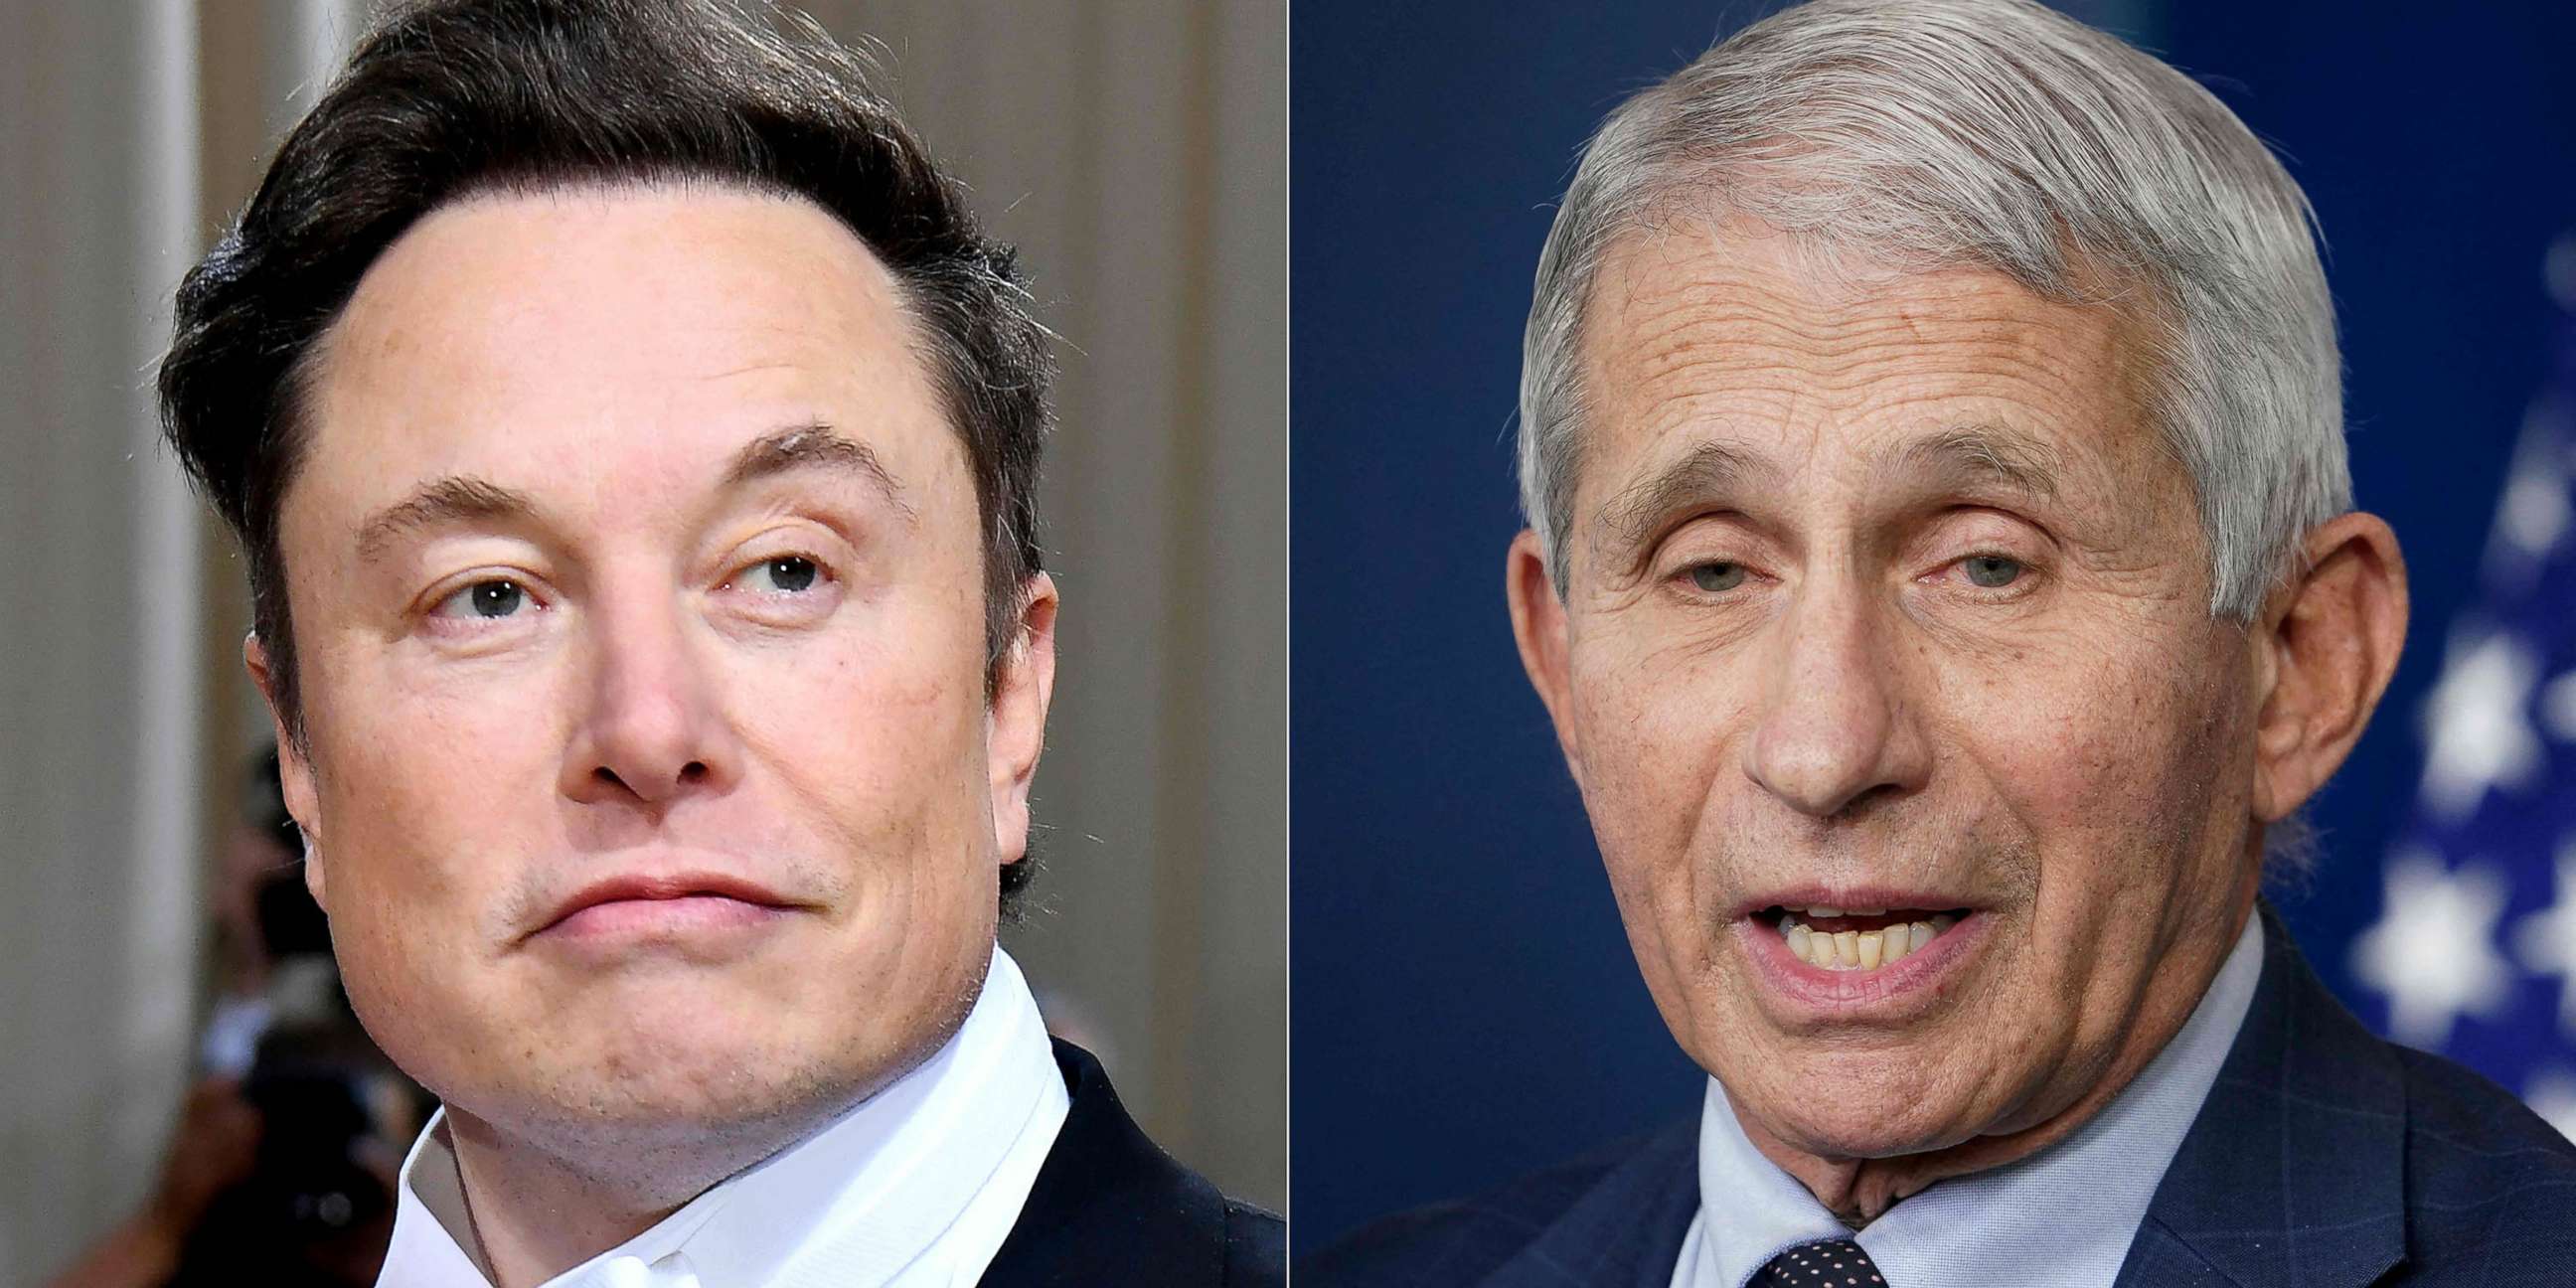 PHOTO: SpaceX CEO Elon Musk (L) on May 2, 2022, at the 2022 Met Gala in New York; Chief Medical Advisor to the President Dr. Anthony Fauci speaking during the daily briefing at the White House in Washington, DC, Dec. 1, 2021.